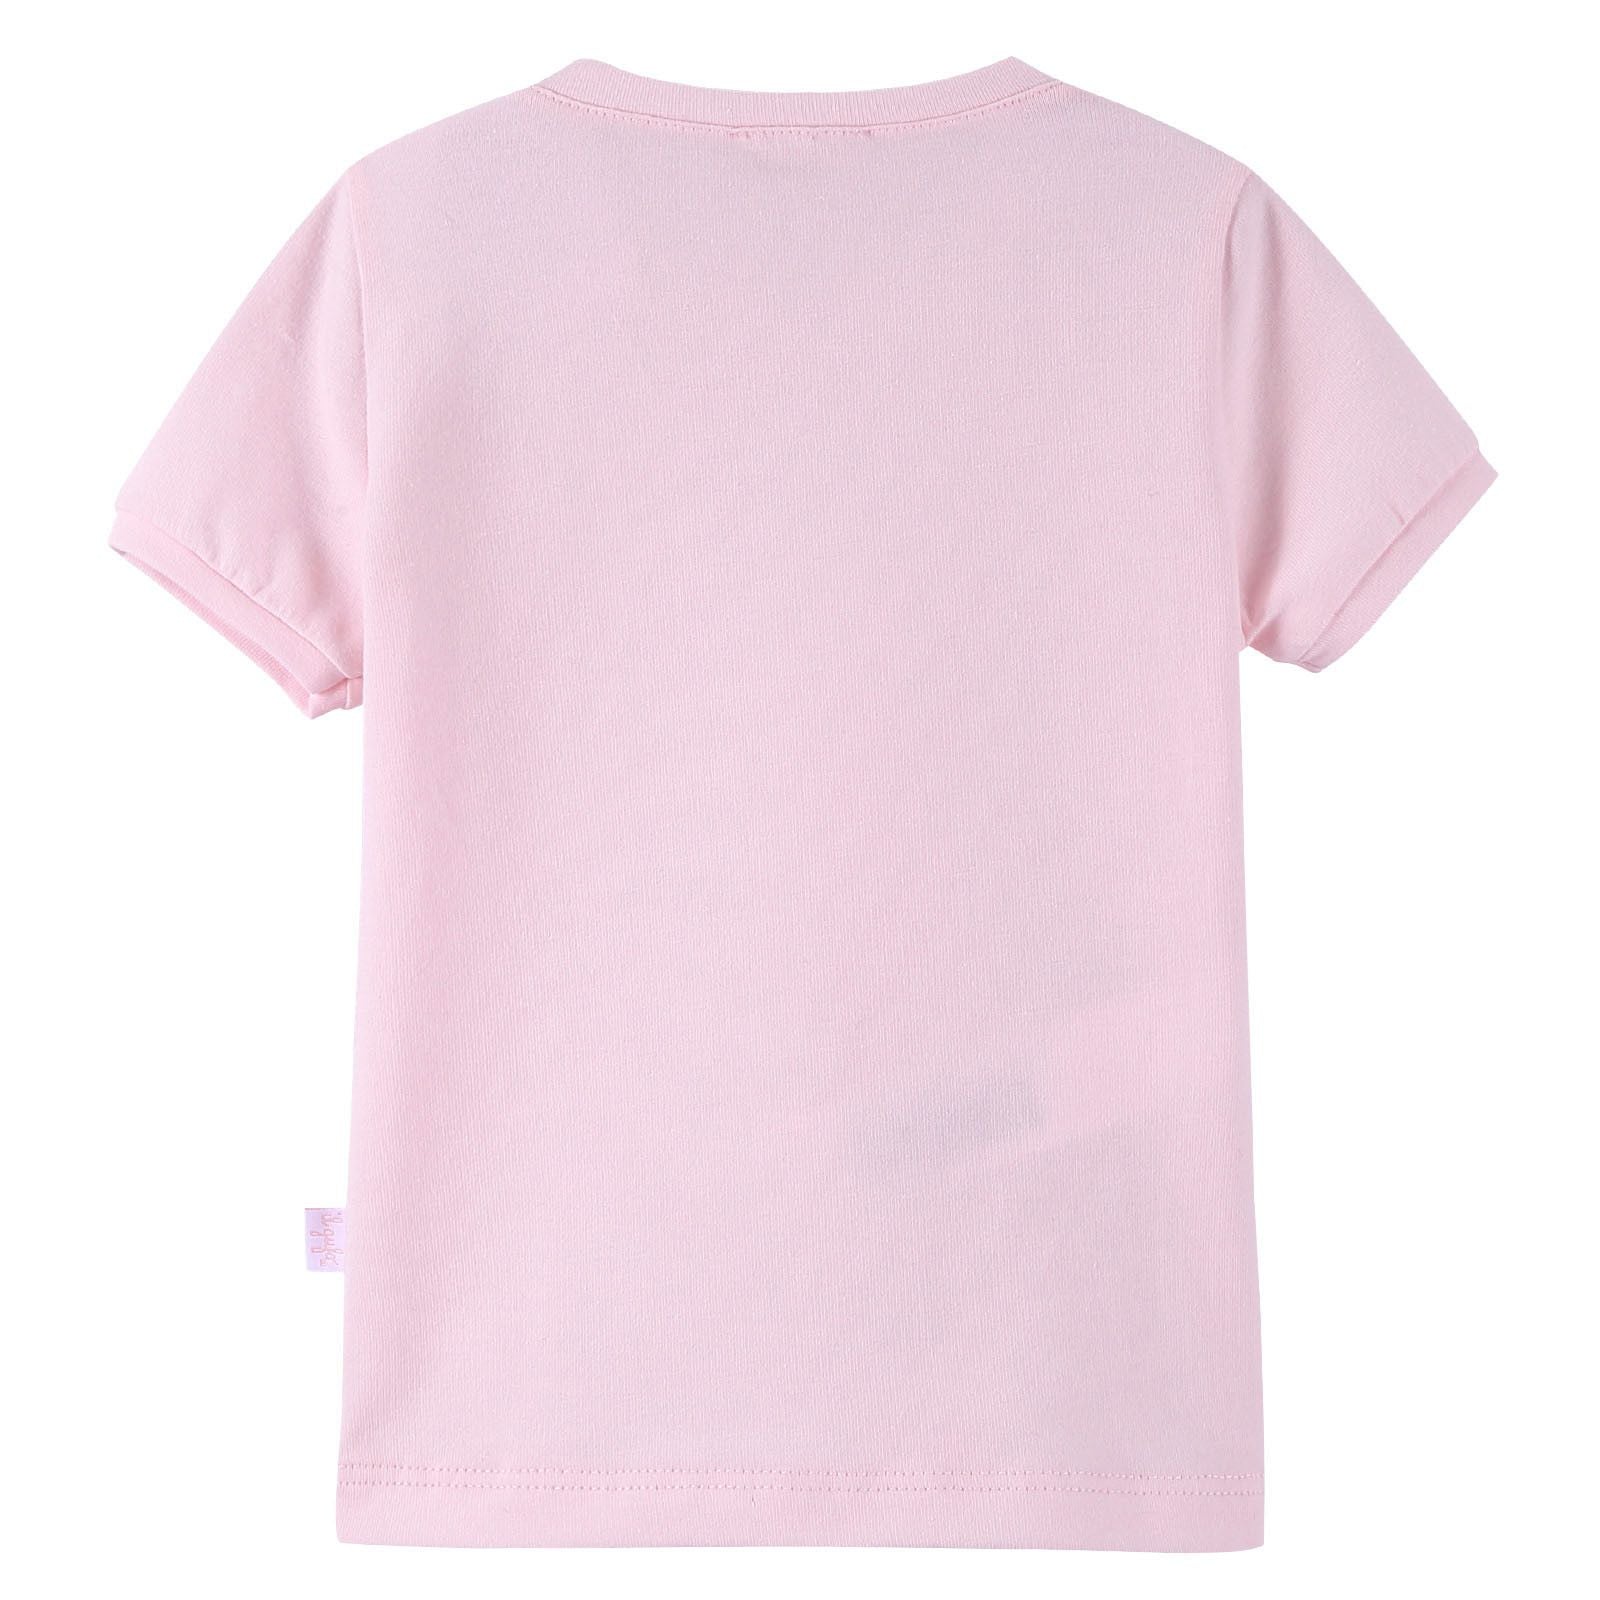 Girls Light Pink Fairy Printed T-Shirt With Ribbed Cuffs - CÉMAROSE | Children's Fashion Store - 2